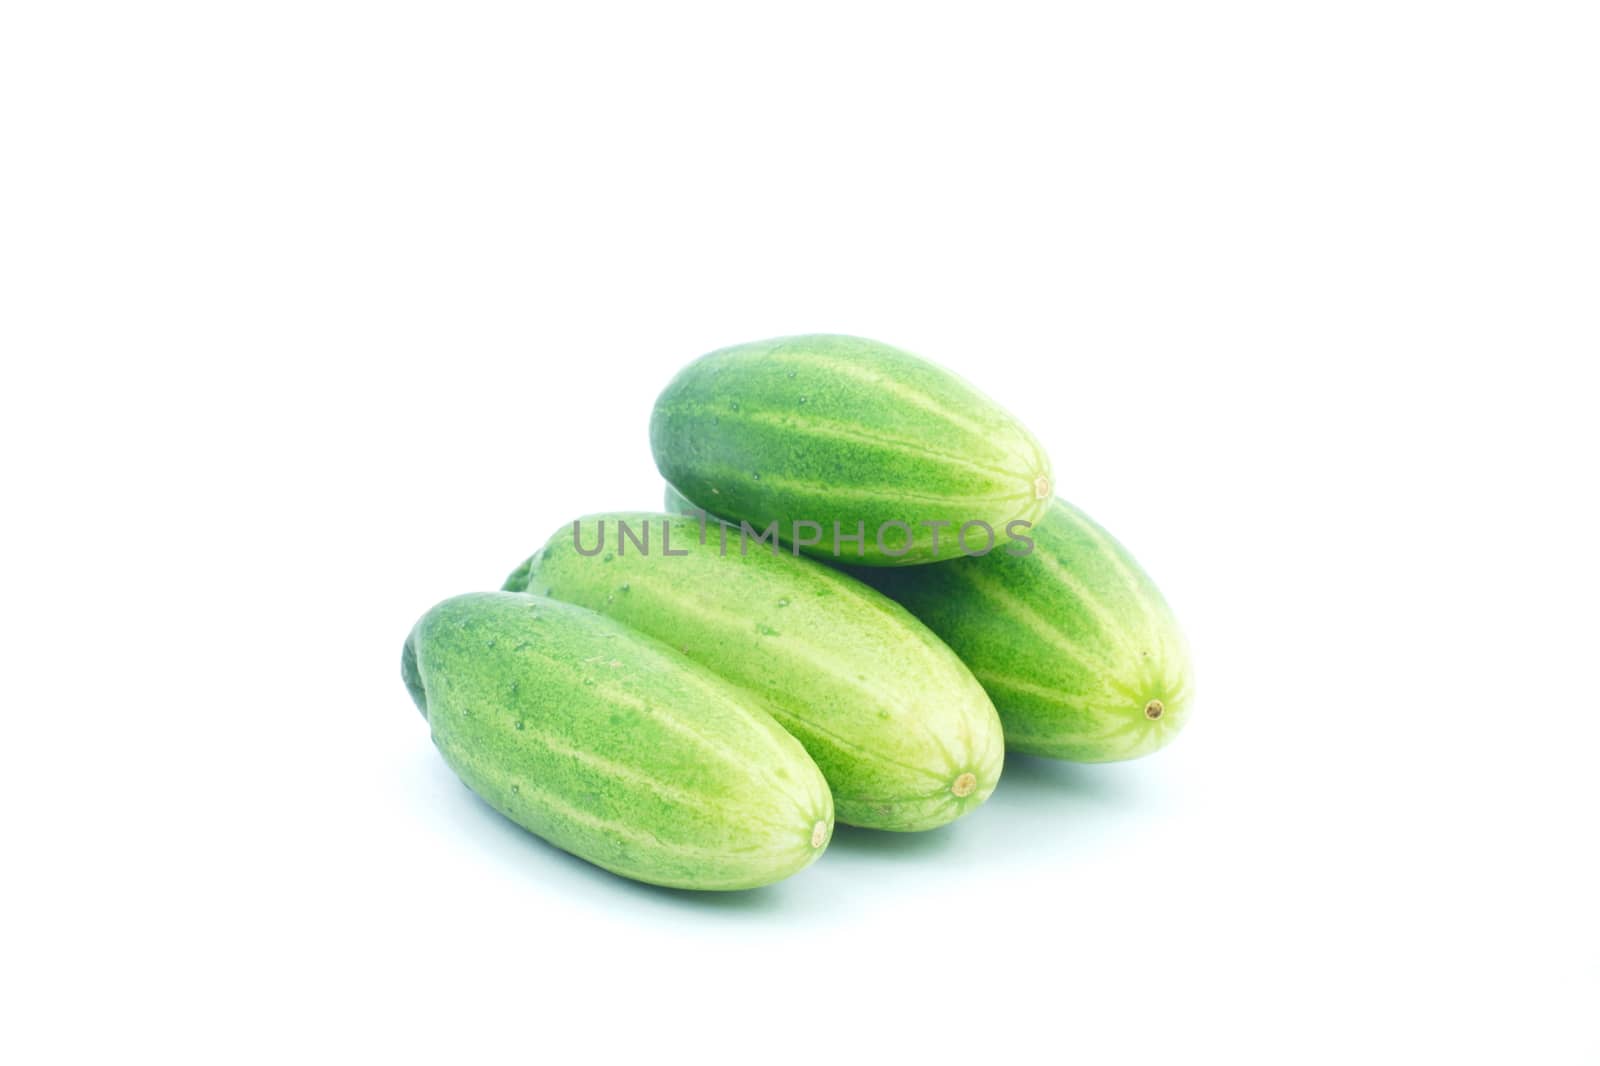 green cucumber on isolate white background by ninelittle